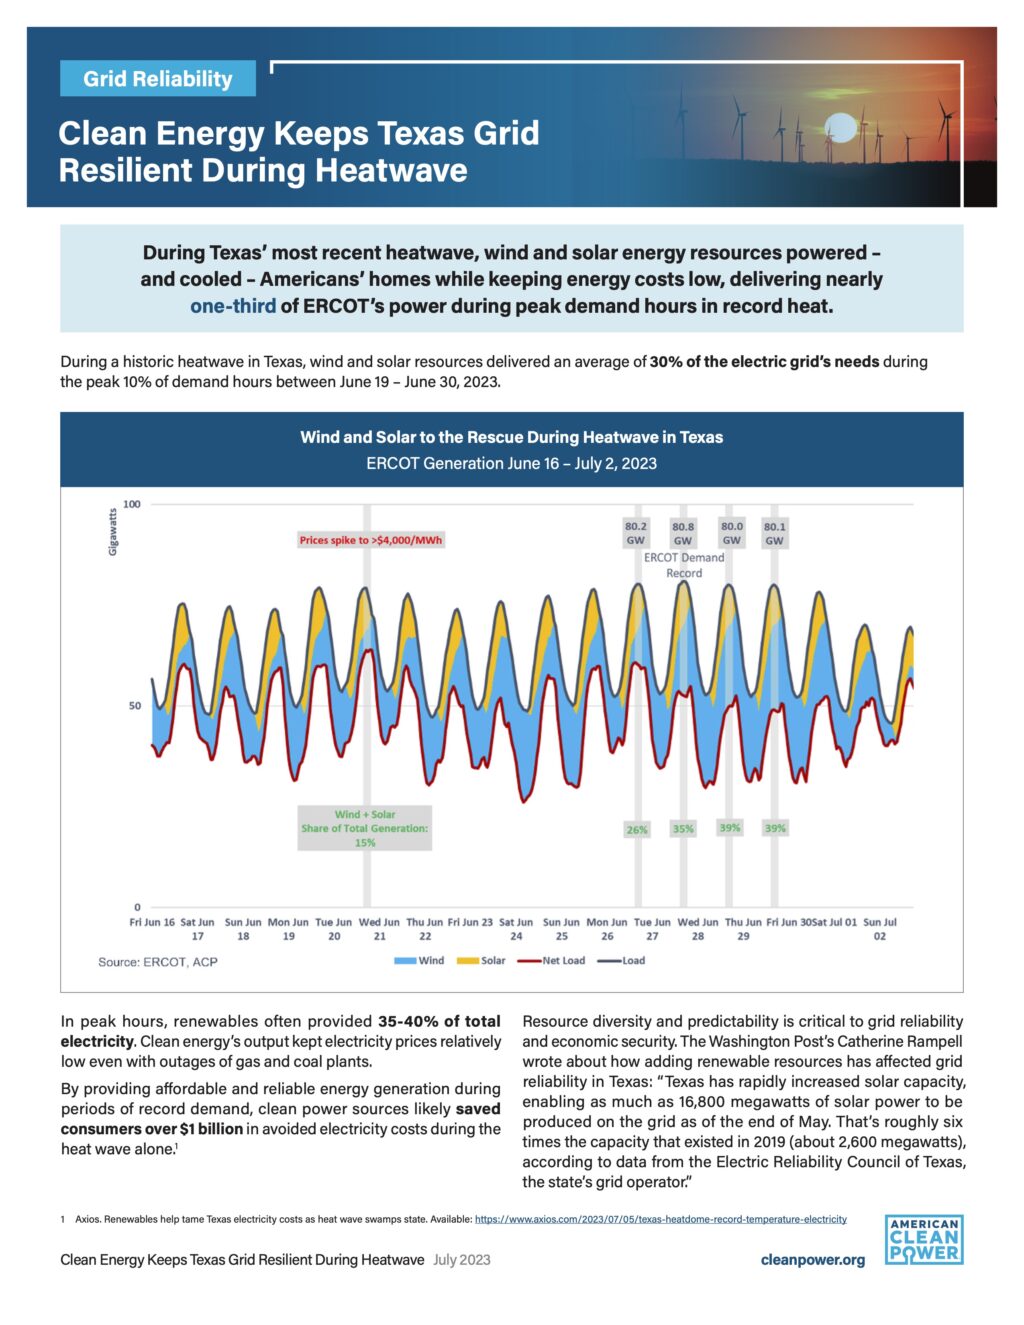 A screenshot of ACP's Reliability ERCOT 2023 Fact Sheet "Clean Energy Keeps Texas Grid Resilient During Heatwave."